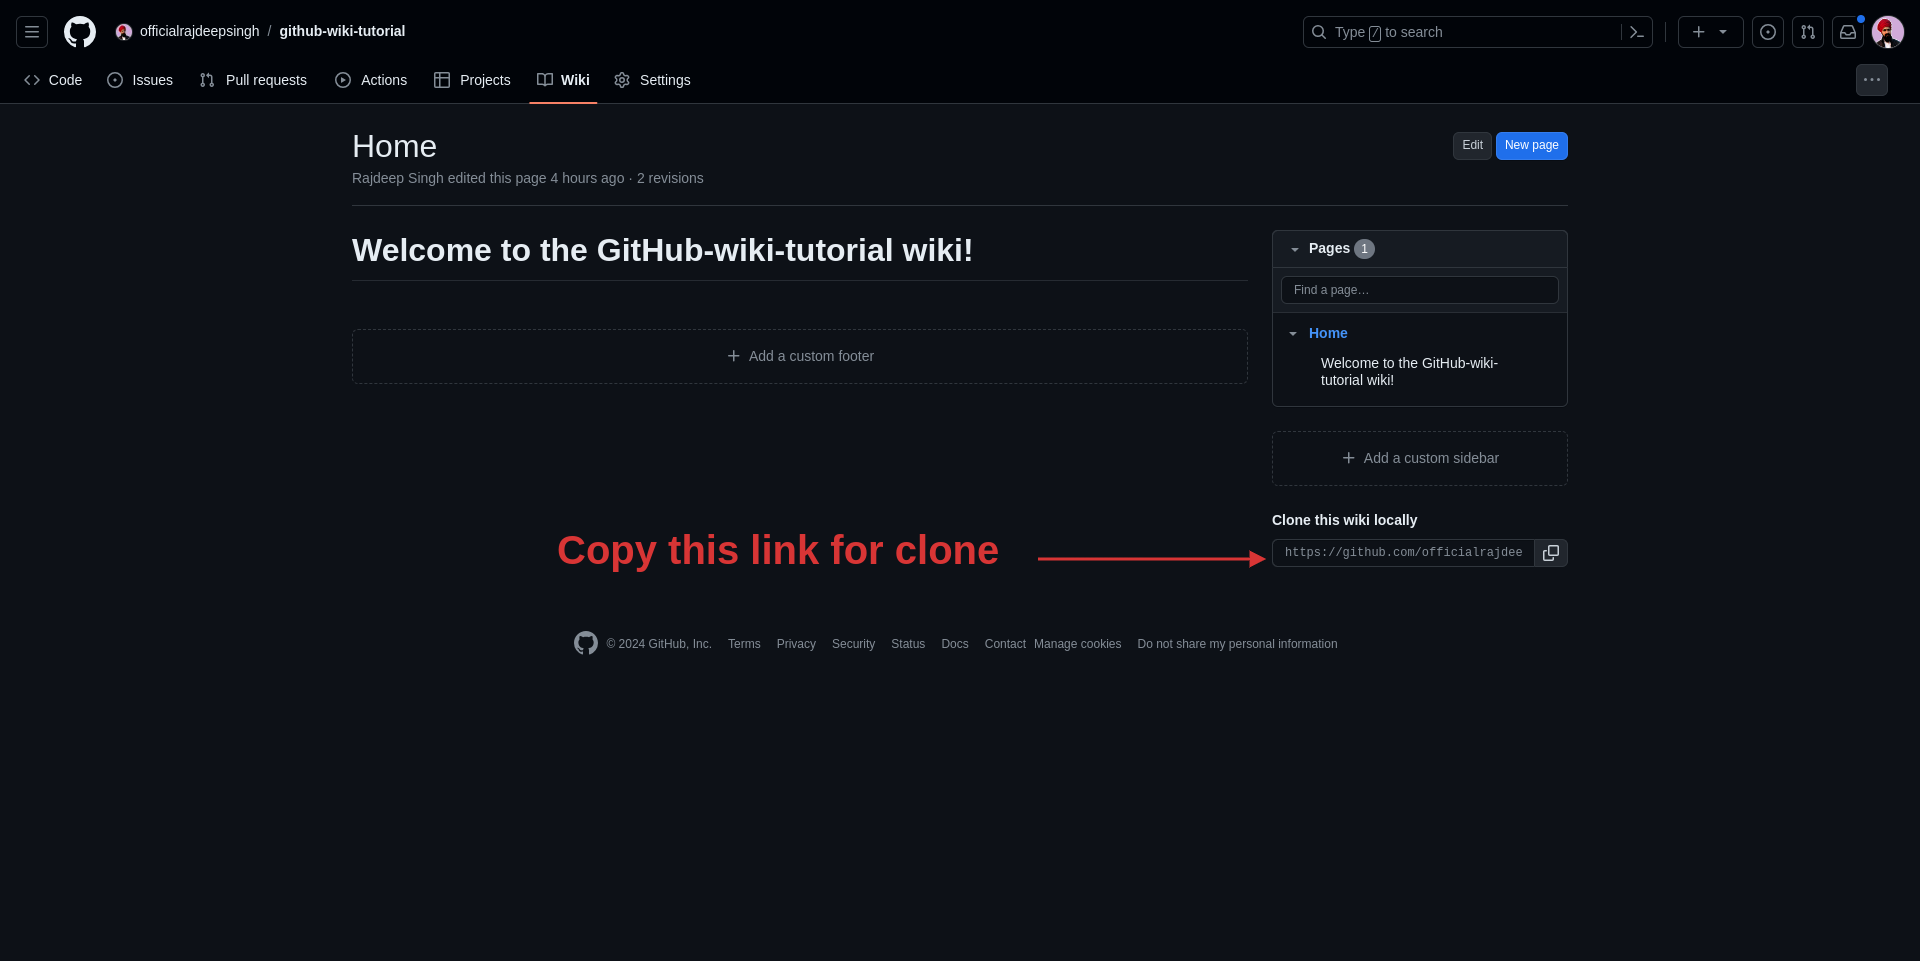 Copy the link to clone the GitHub wiki.